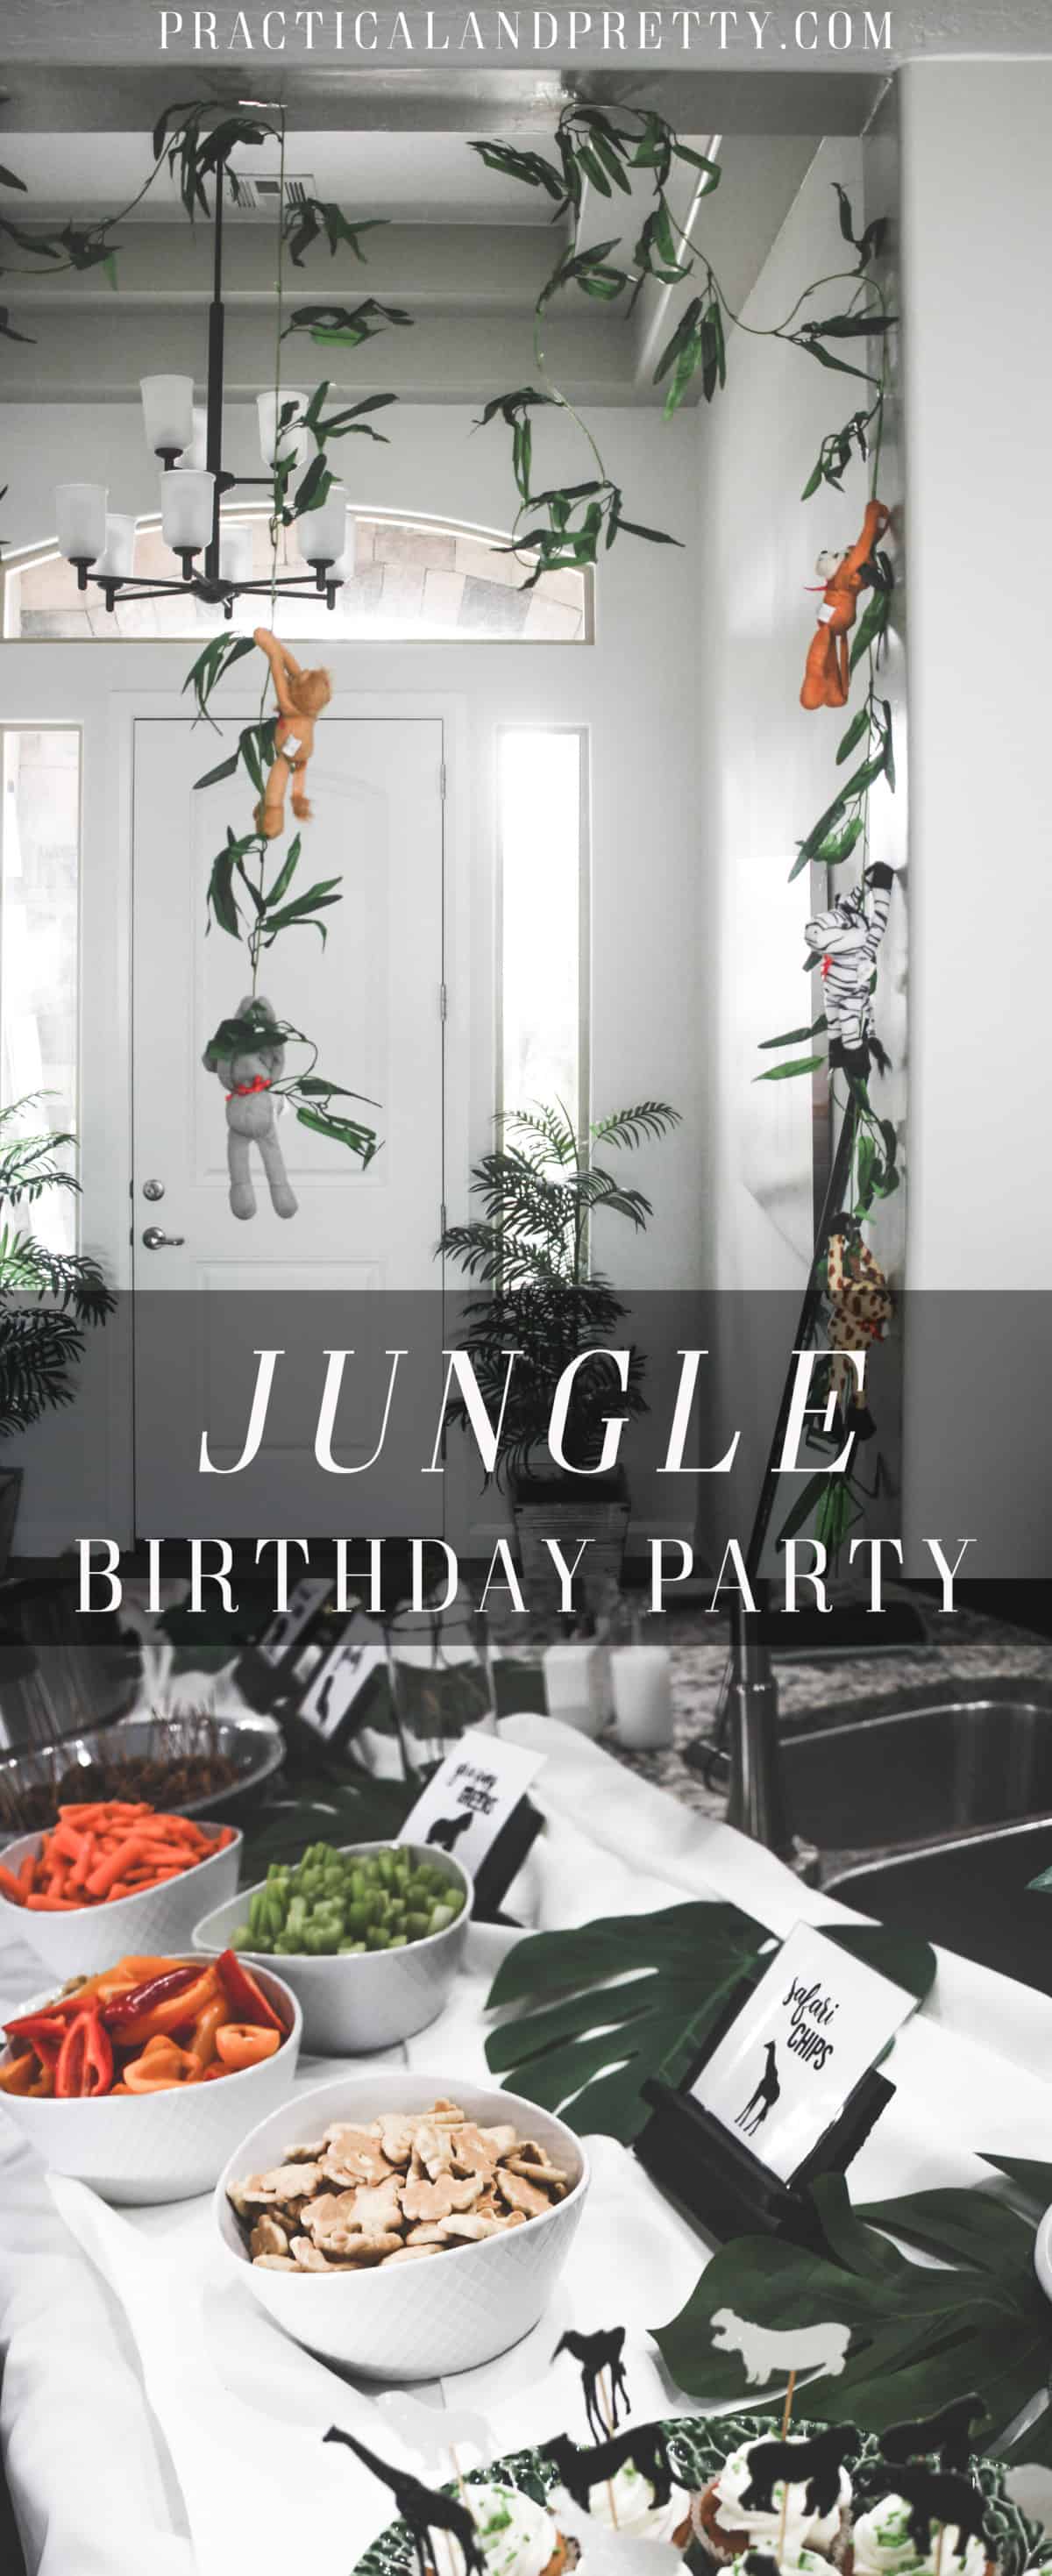 This jungle party looks so fun and was so simple to put together! Check out all the free printables included too!